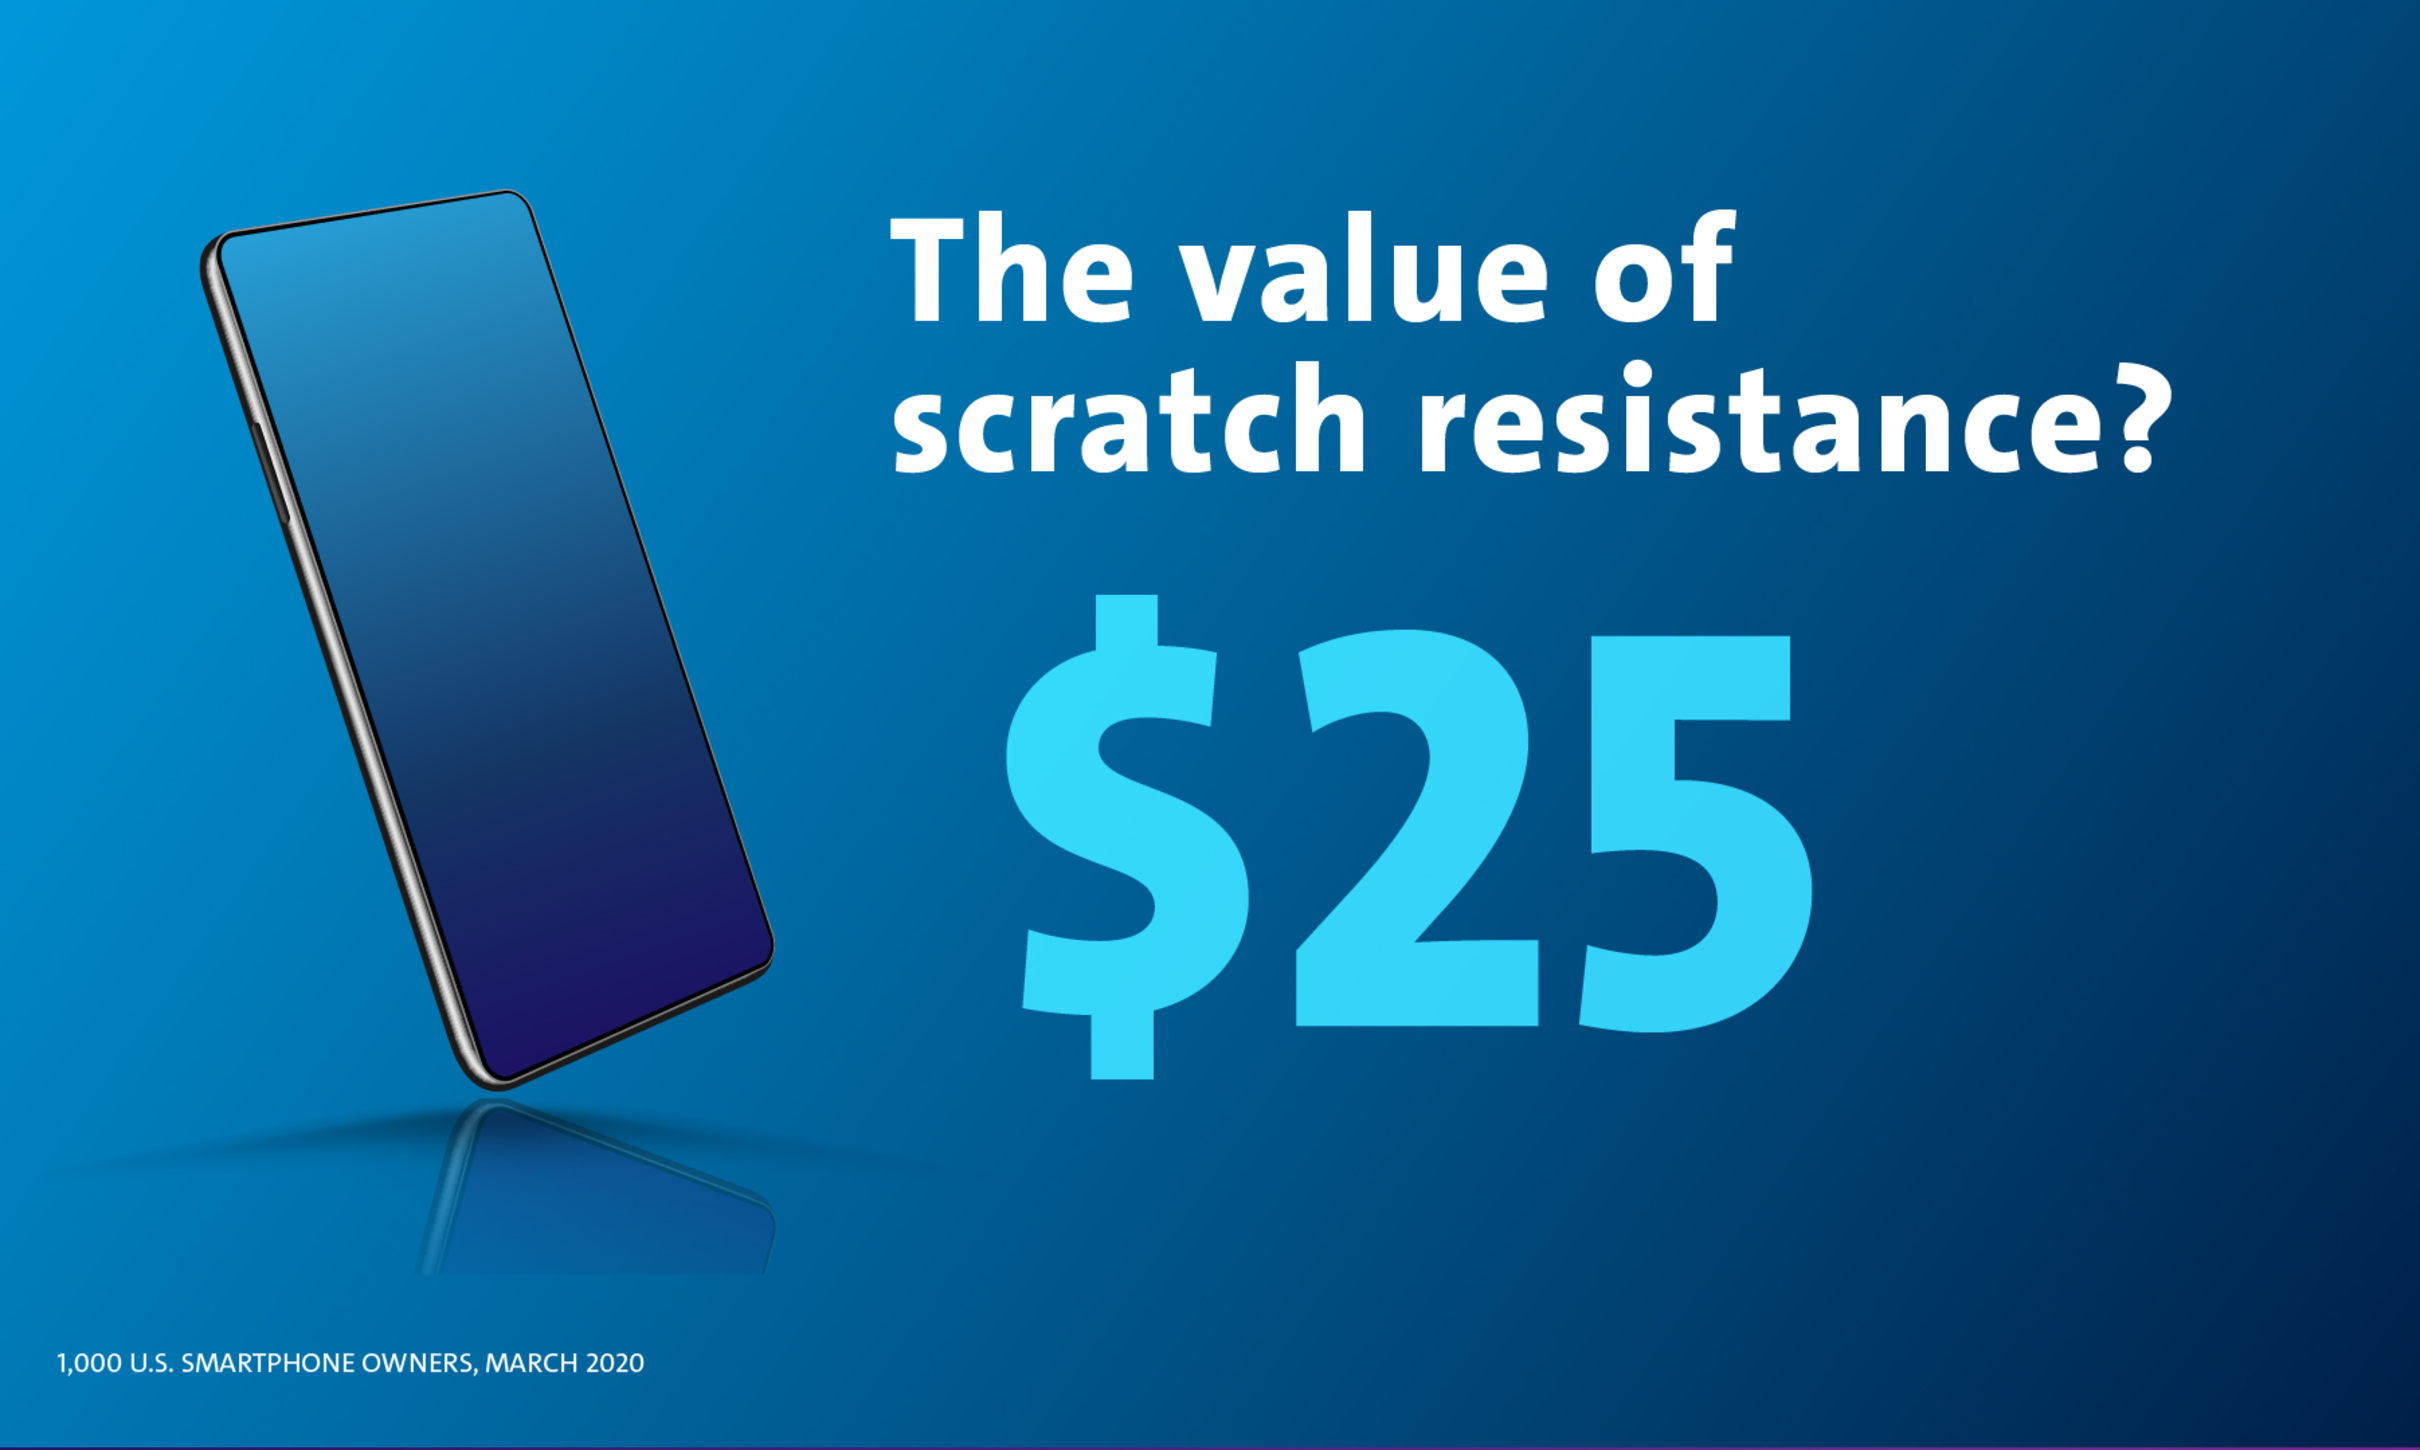 The value of scratch resistance?